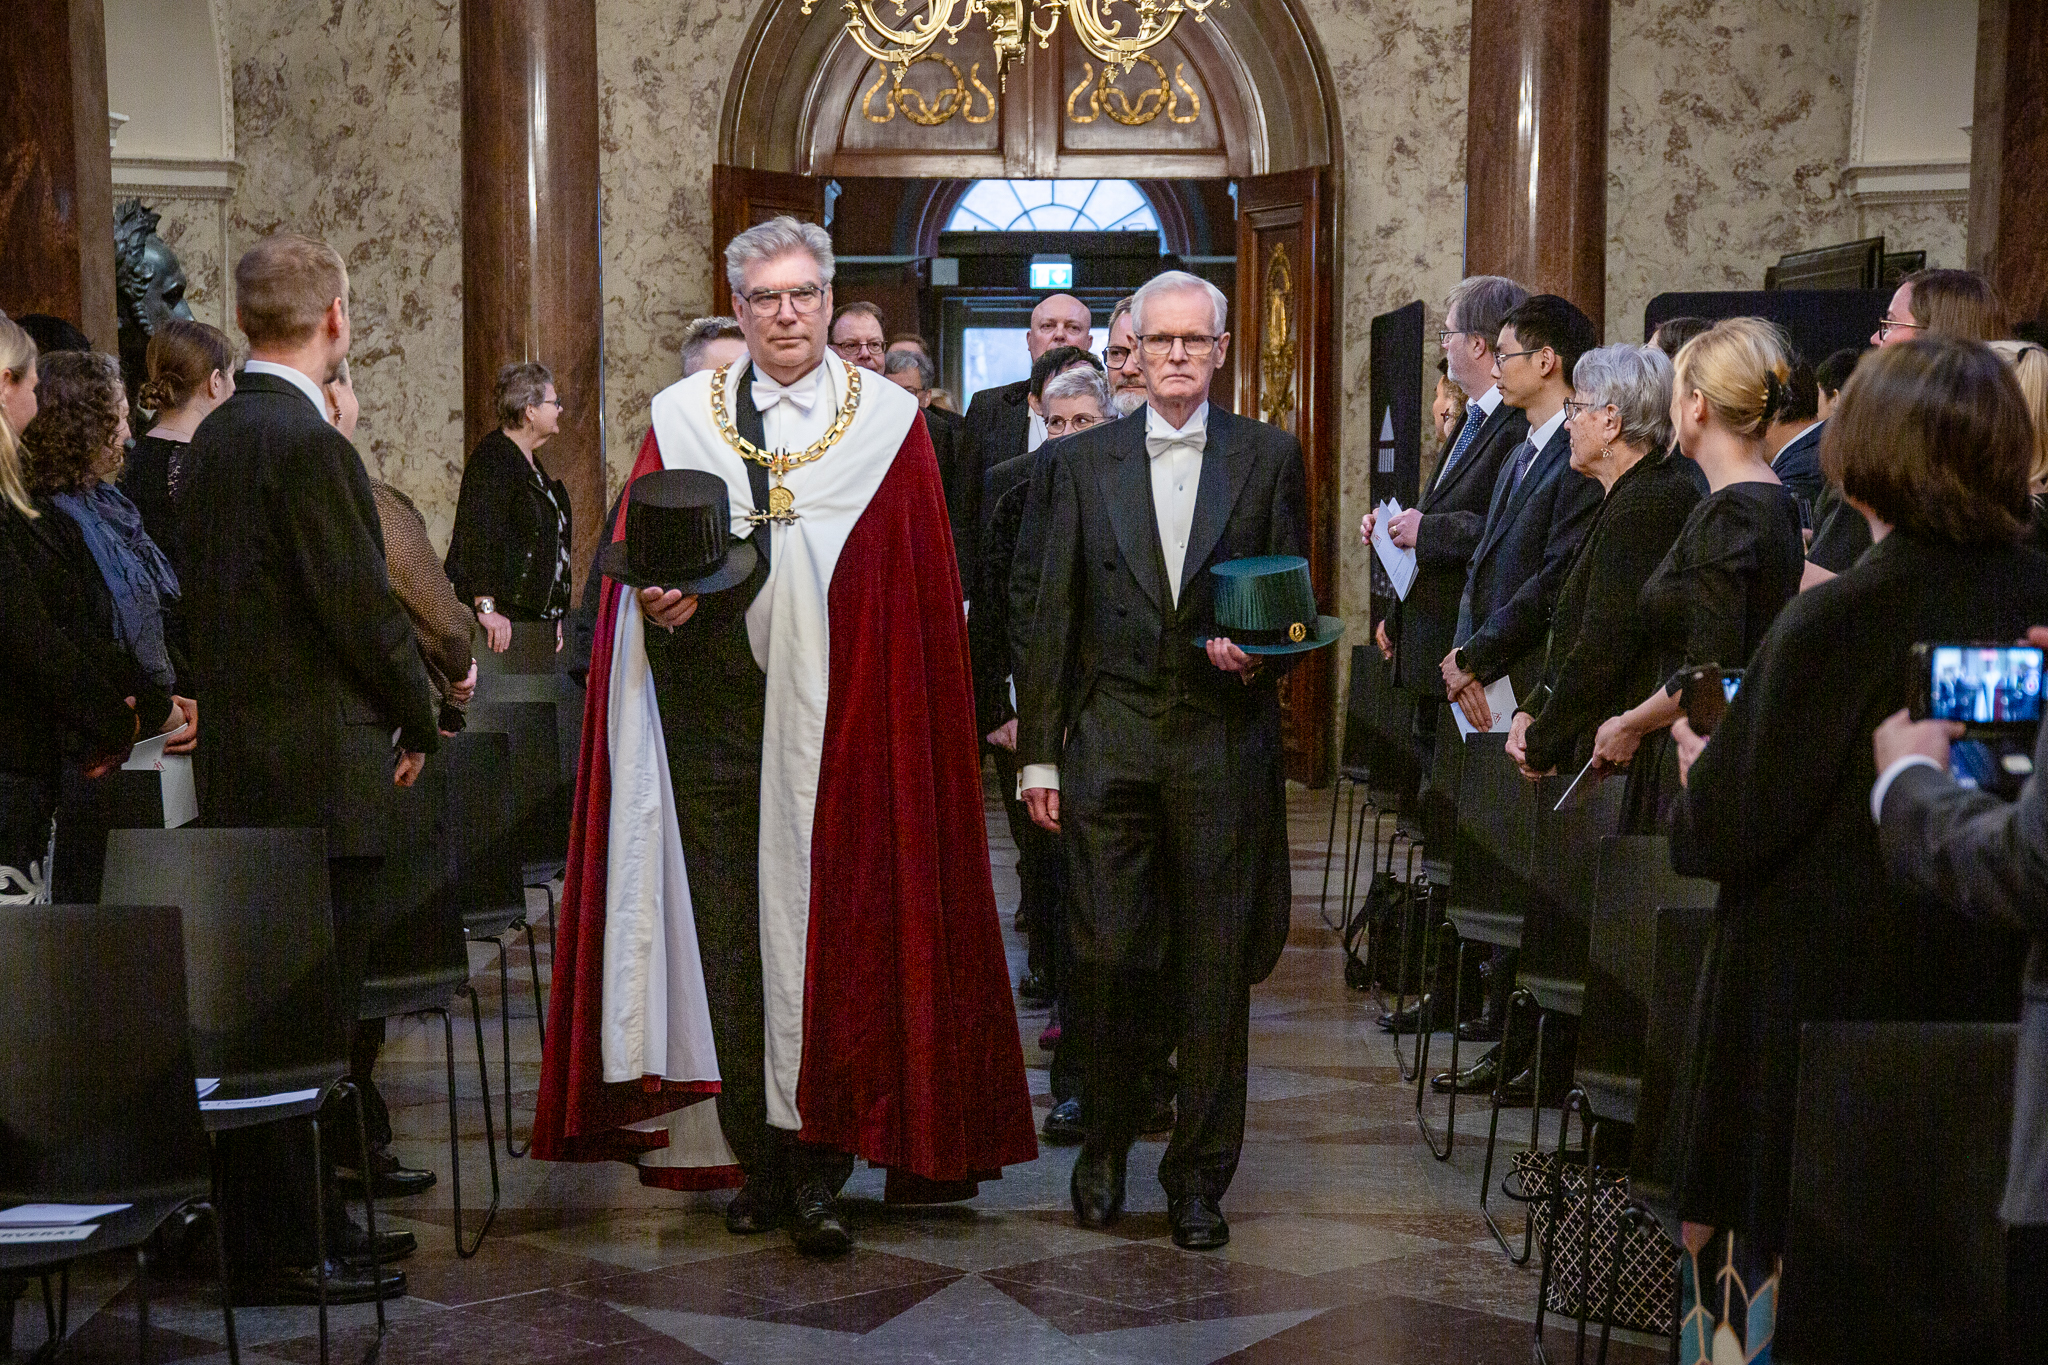 Rector Mikael Lindfelt and Chancellor Carl Gustav Gahmberg enters the Old Academy Building.